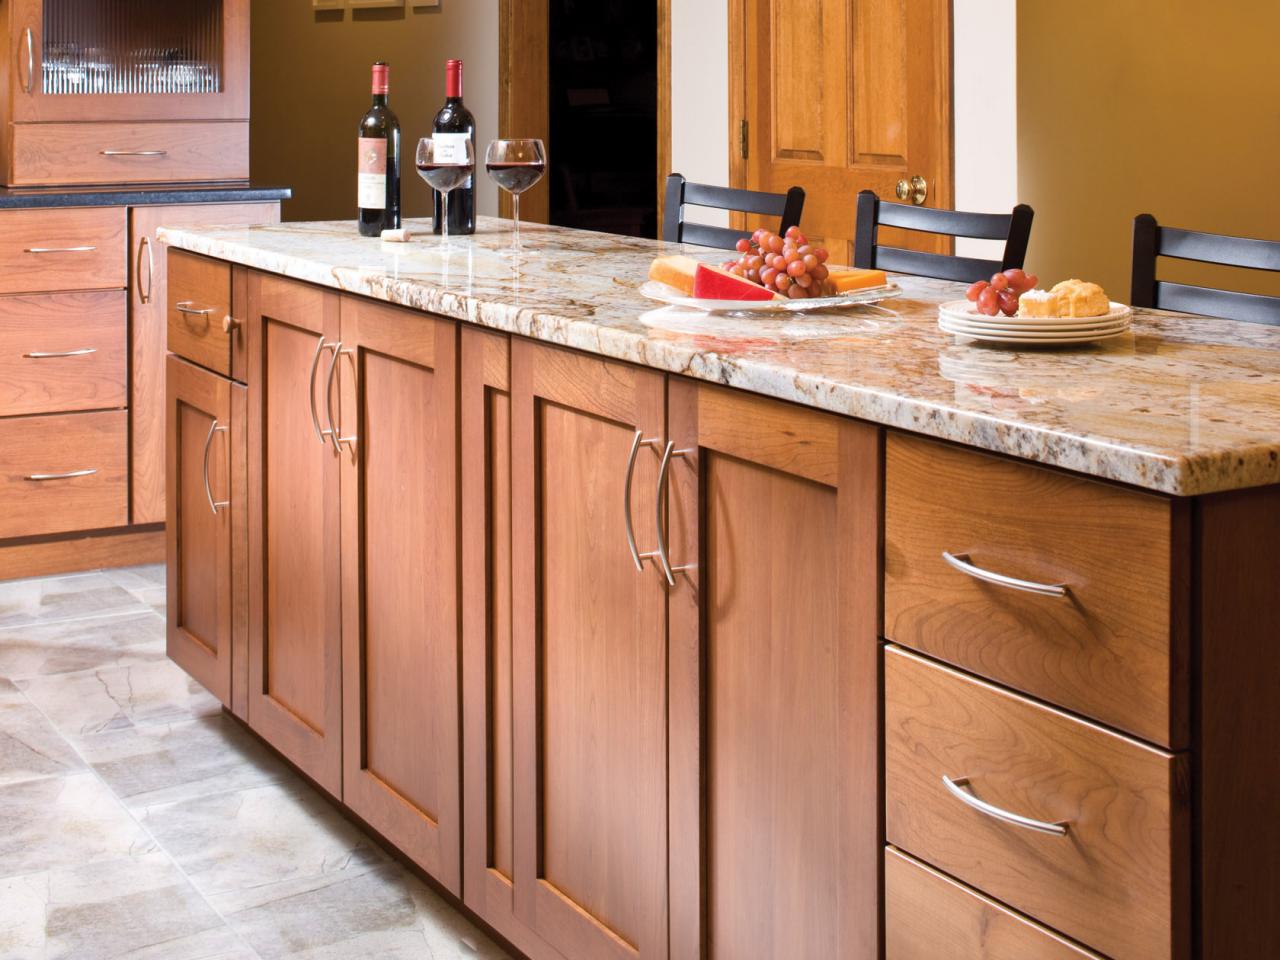 CABINETS REFACING PARK RIDGE AS A REALLY EXCELLENT EXPERIENCE